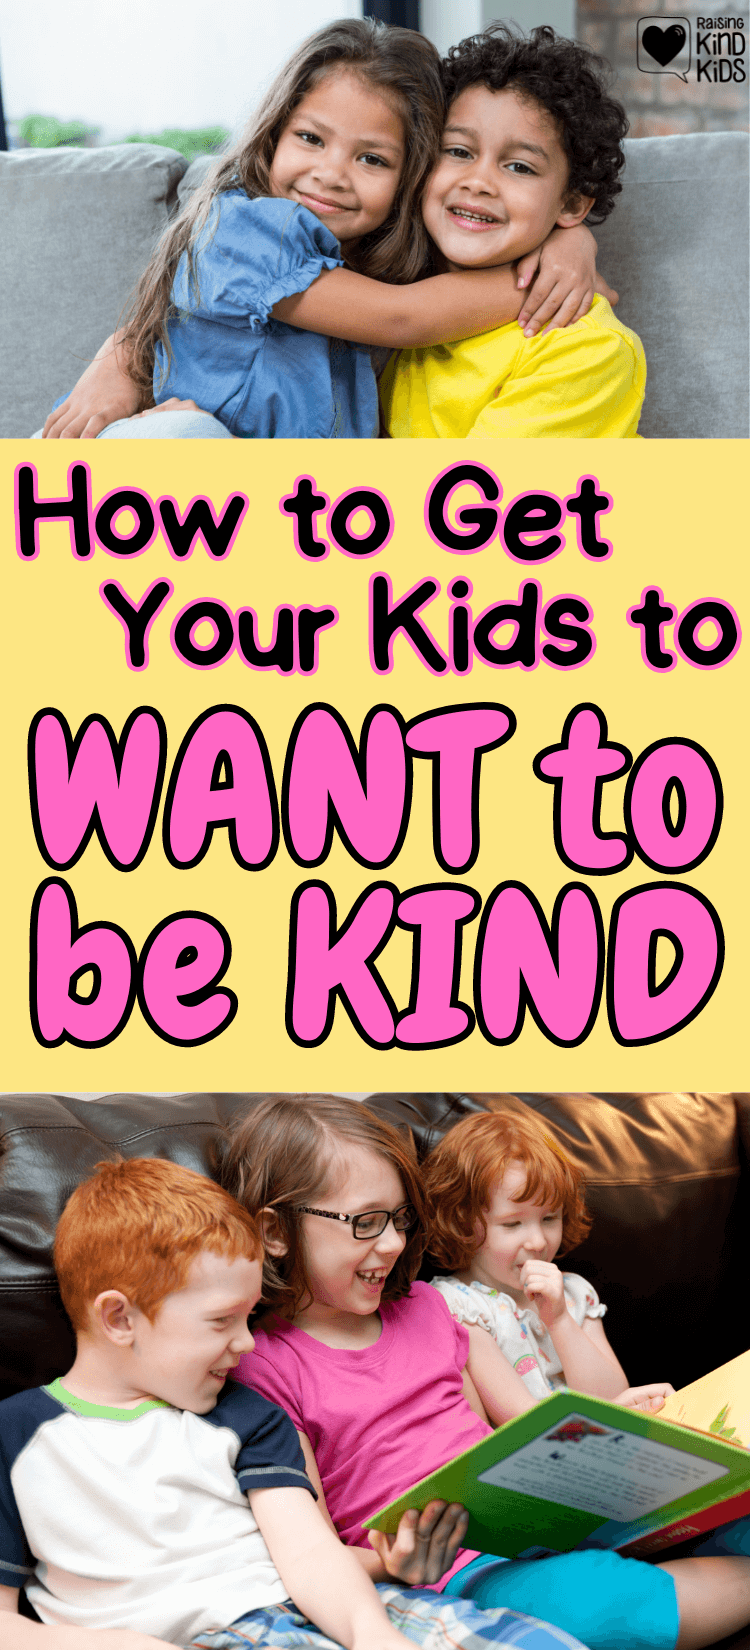 Join thousands of parents who already Know the 3 secrets to get our Kids to be Kind more often with less reminders. Get the FREE Video here so you know these strategies too.